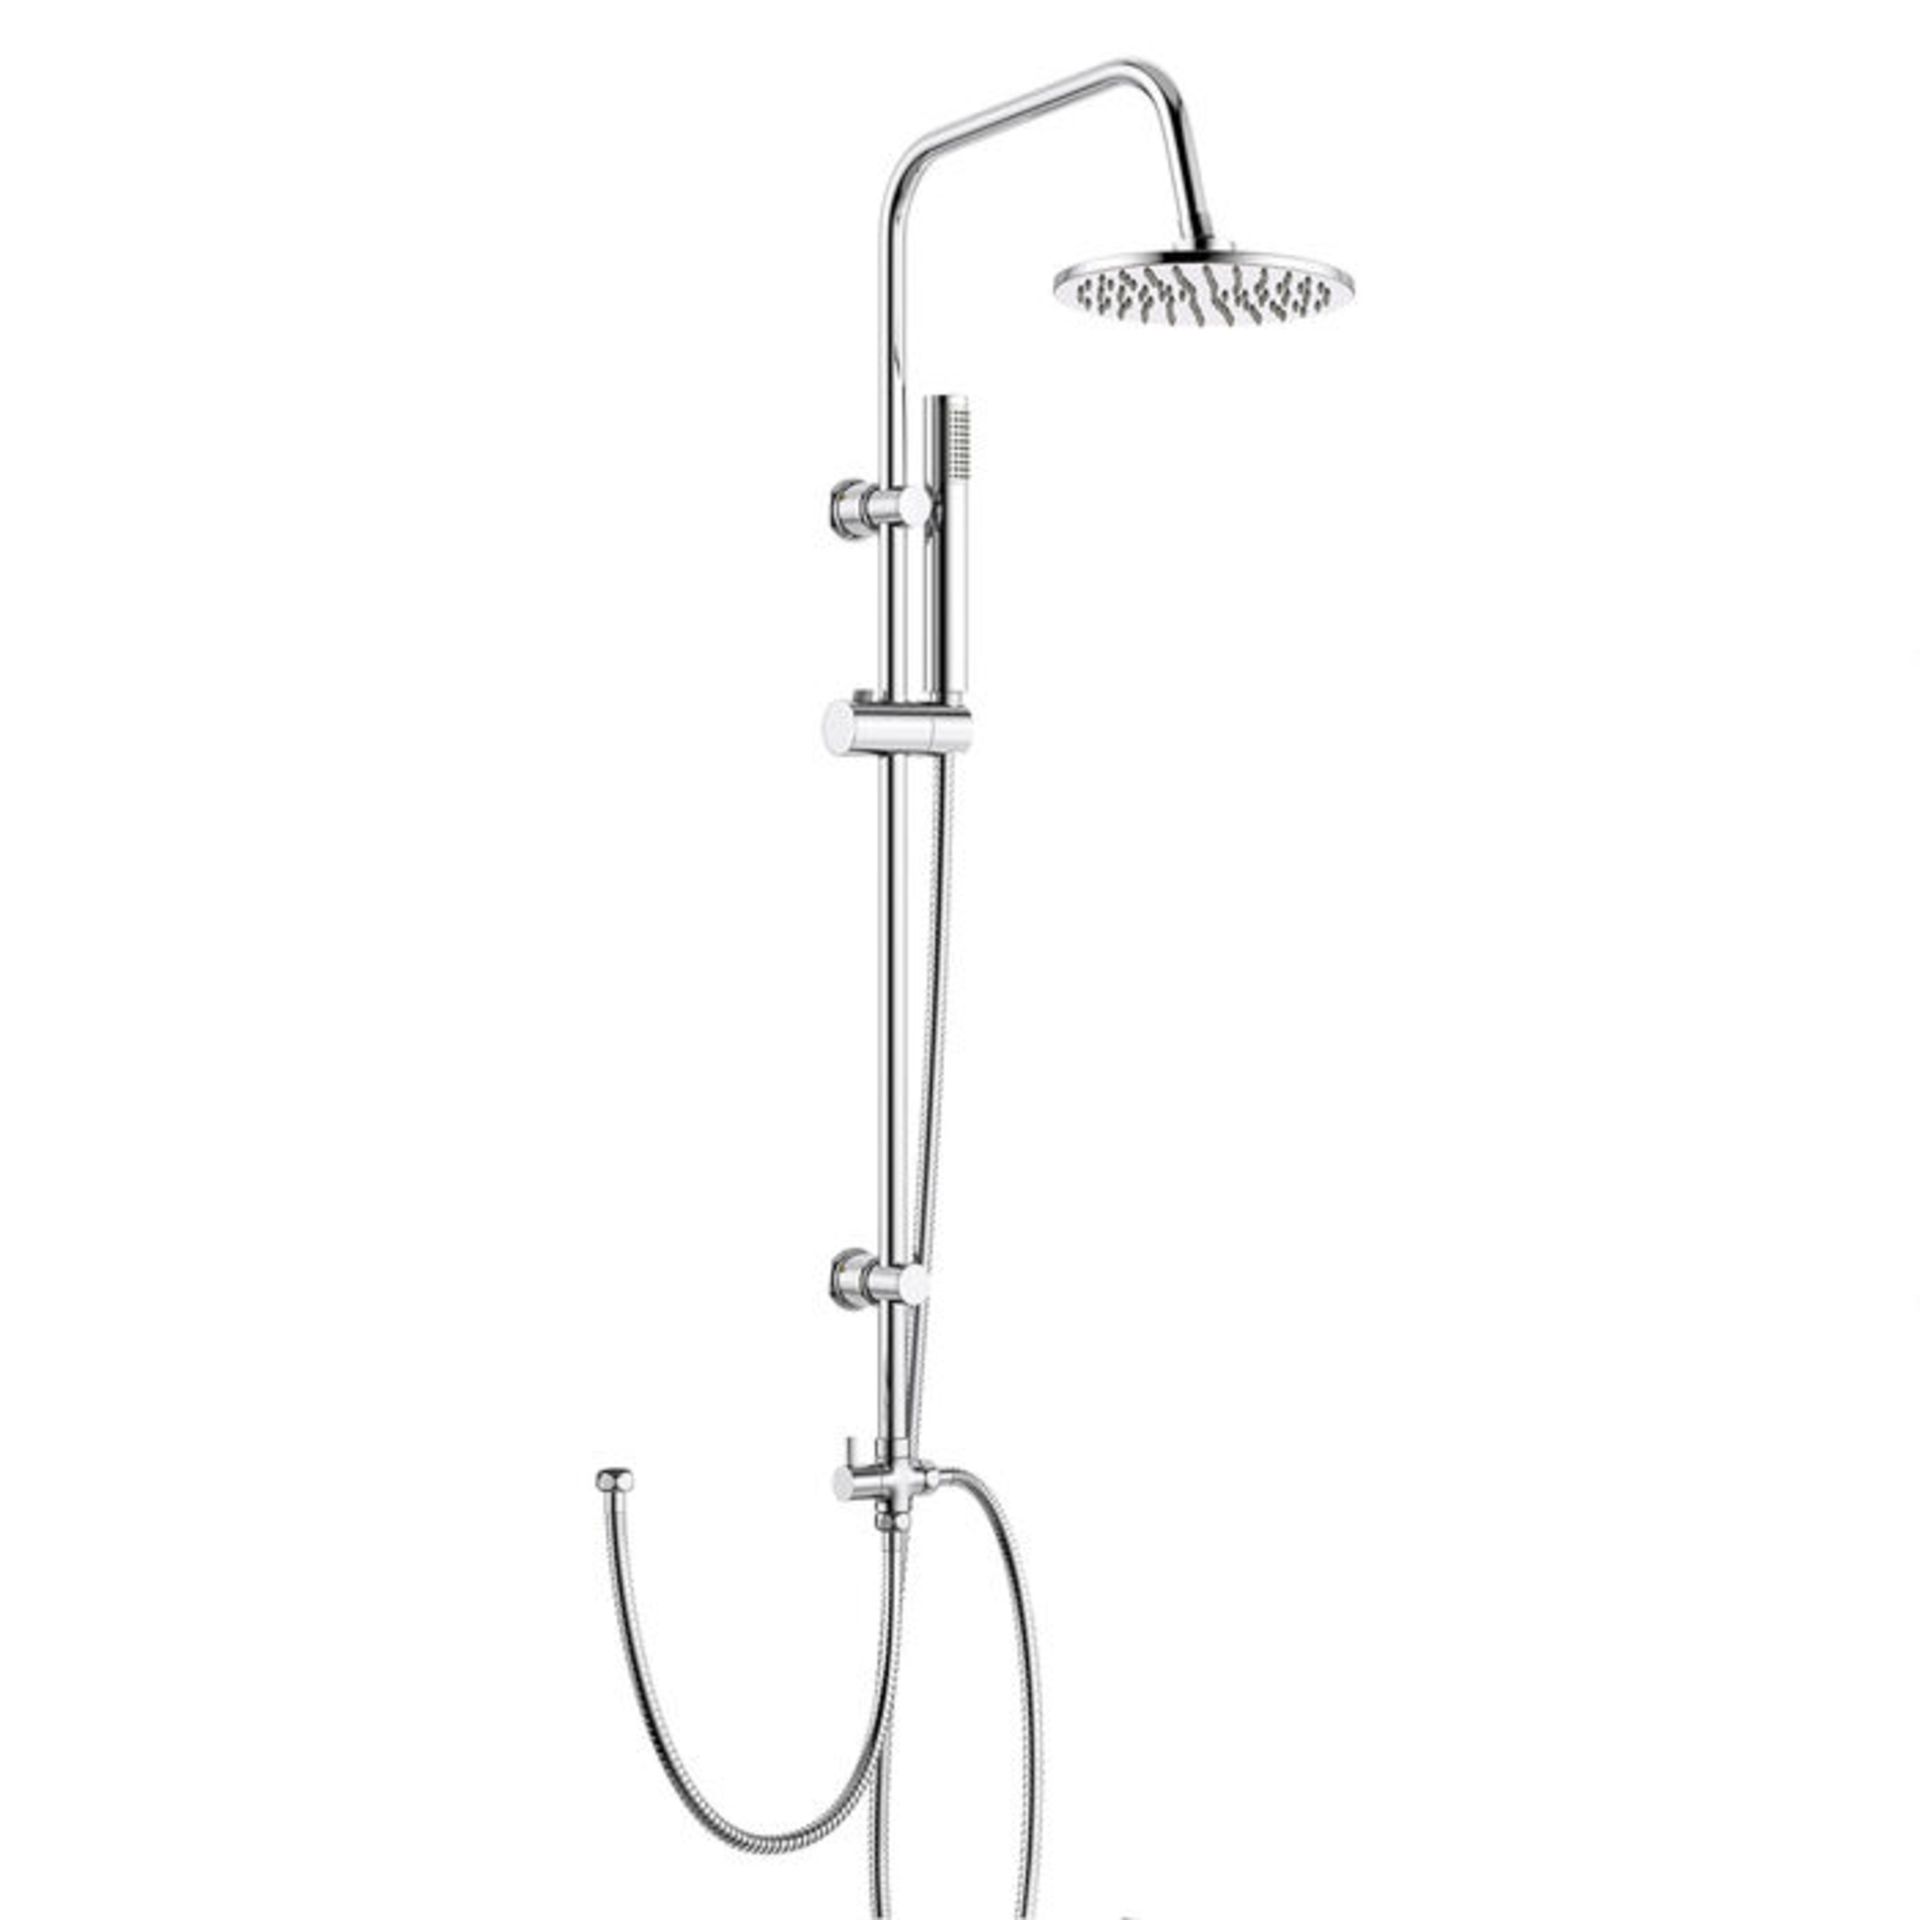 200mm Round Head, Riser Rail & Handheld Kit Quality stainless steel shower head with Easy Clea... - Image 2 of 3